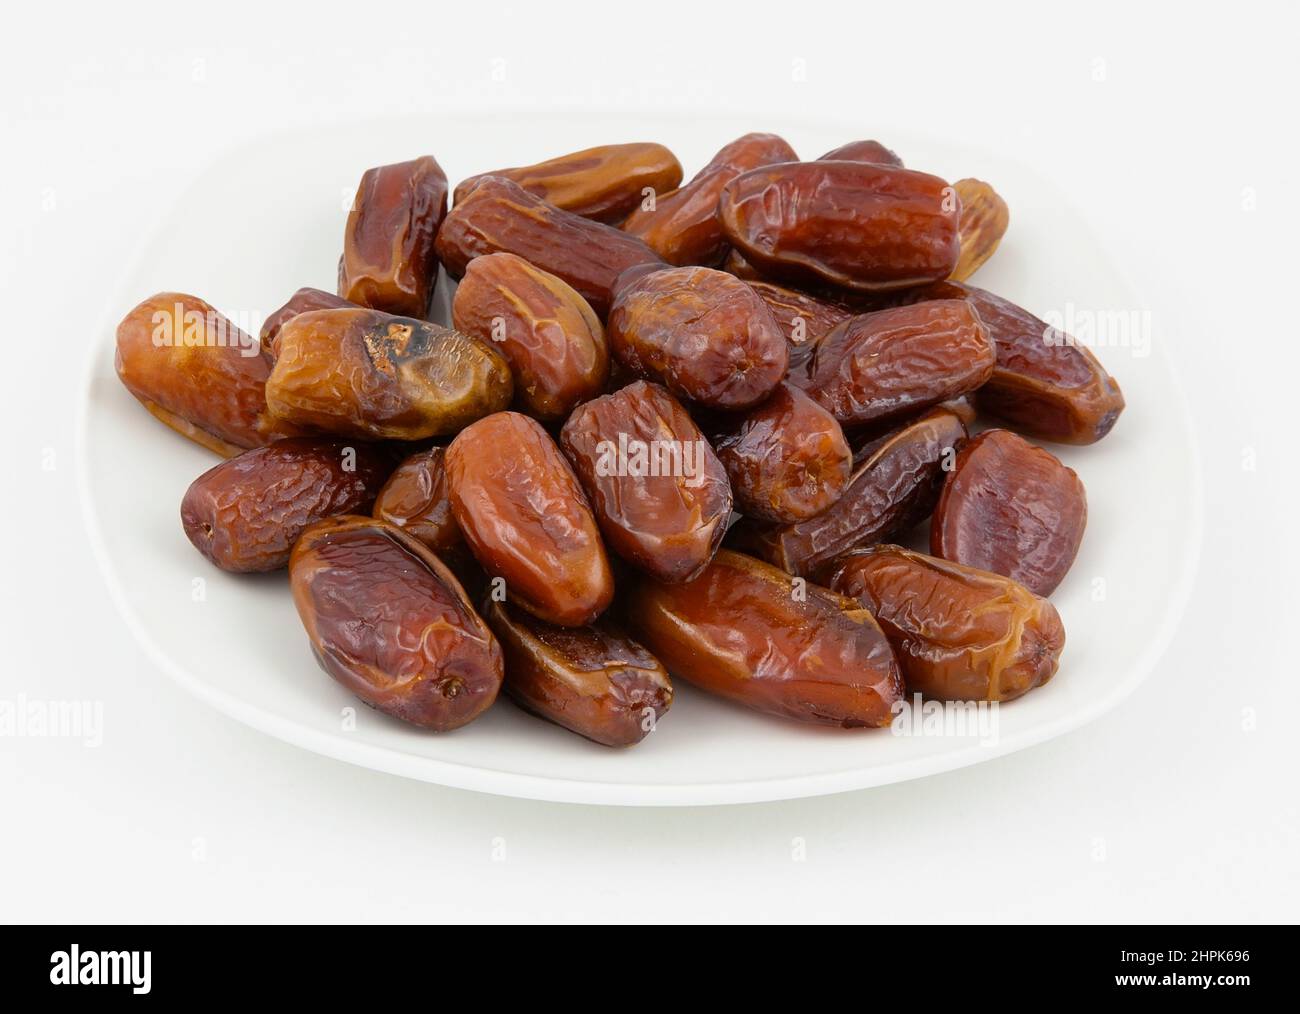 Food, Snacks, Dried Fuit, Deglet Nour Dates also known as Royal Dates. Stock Photo